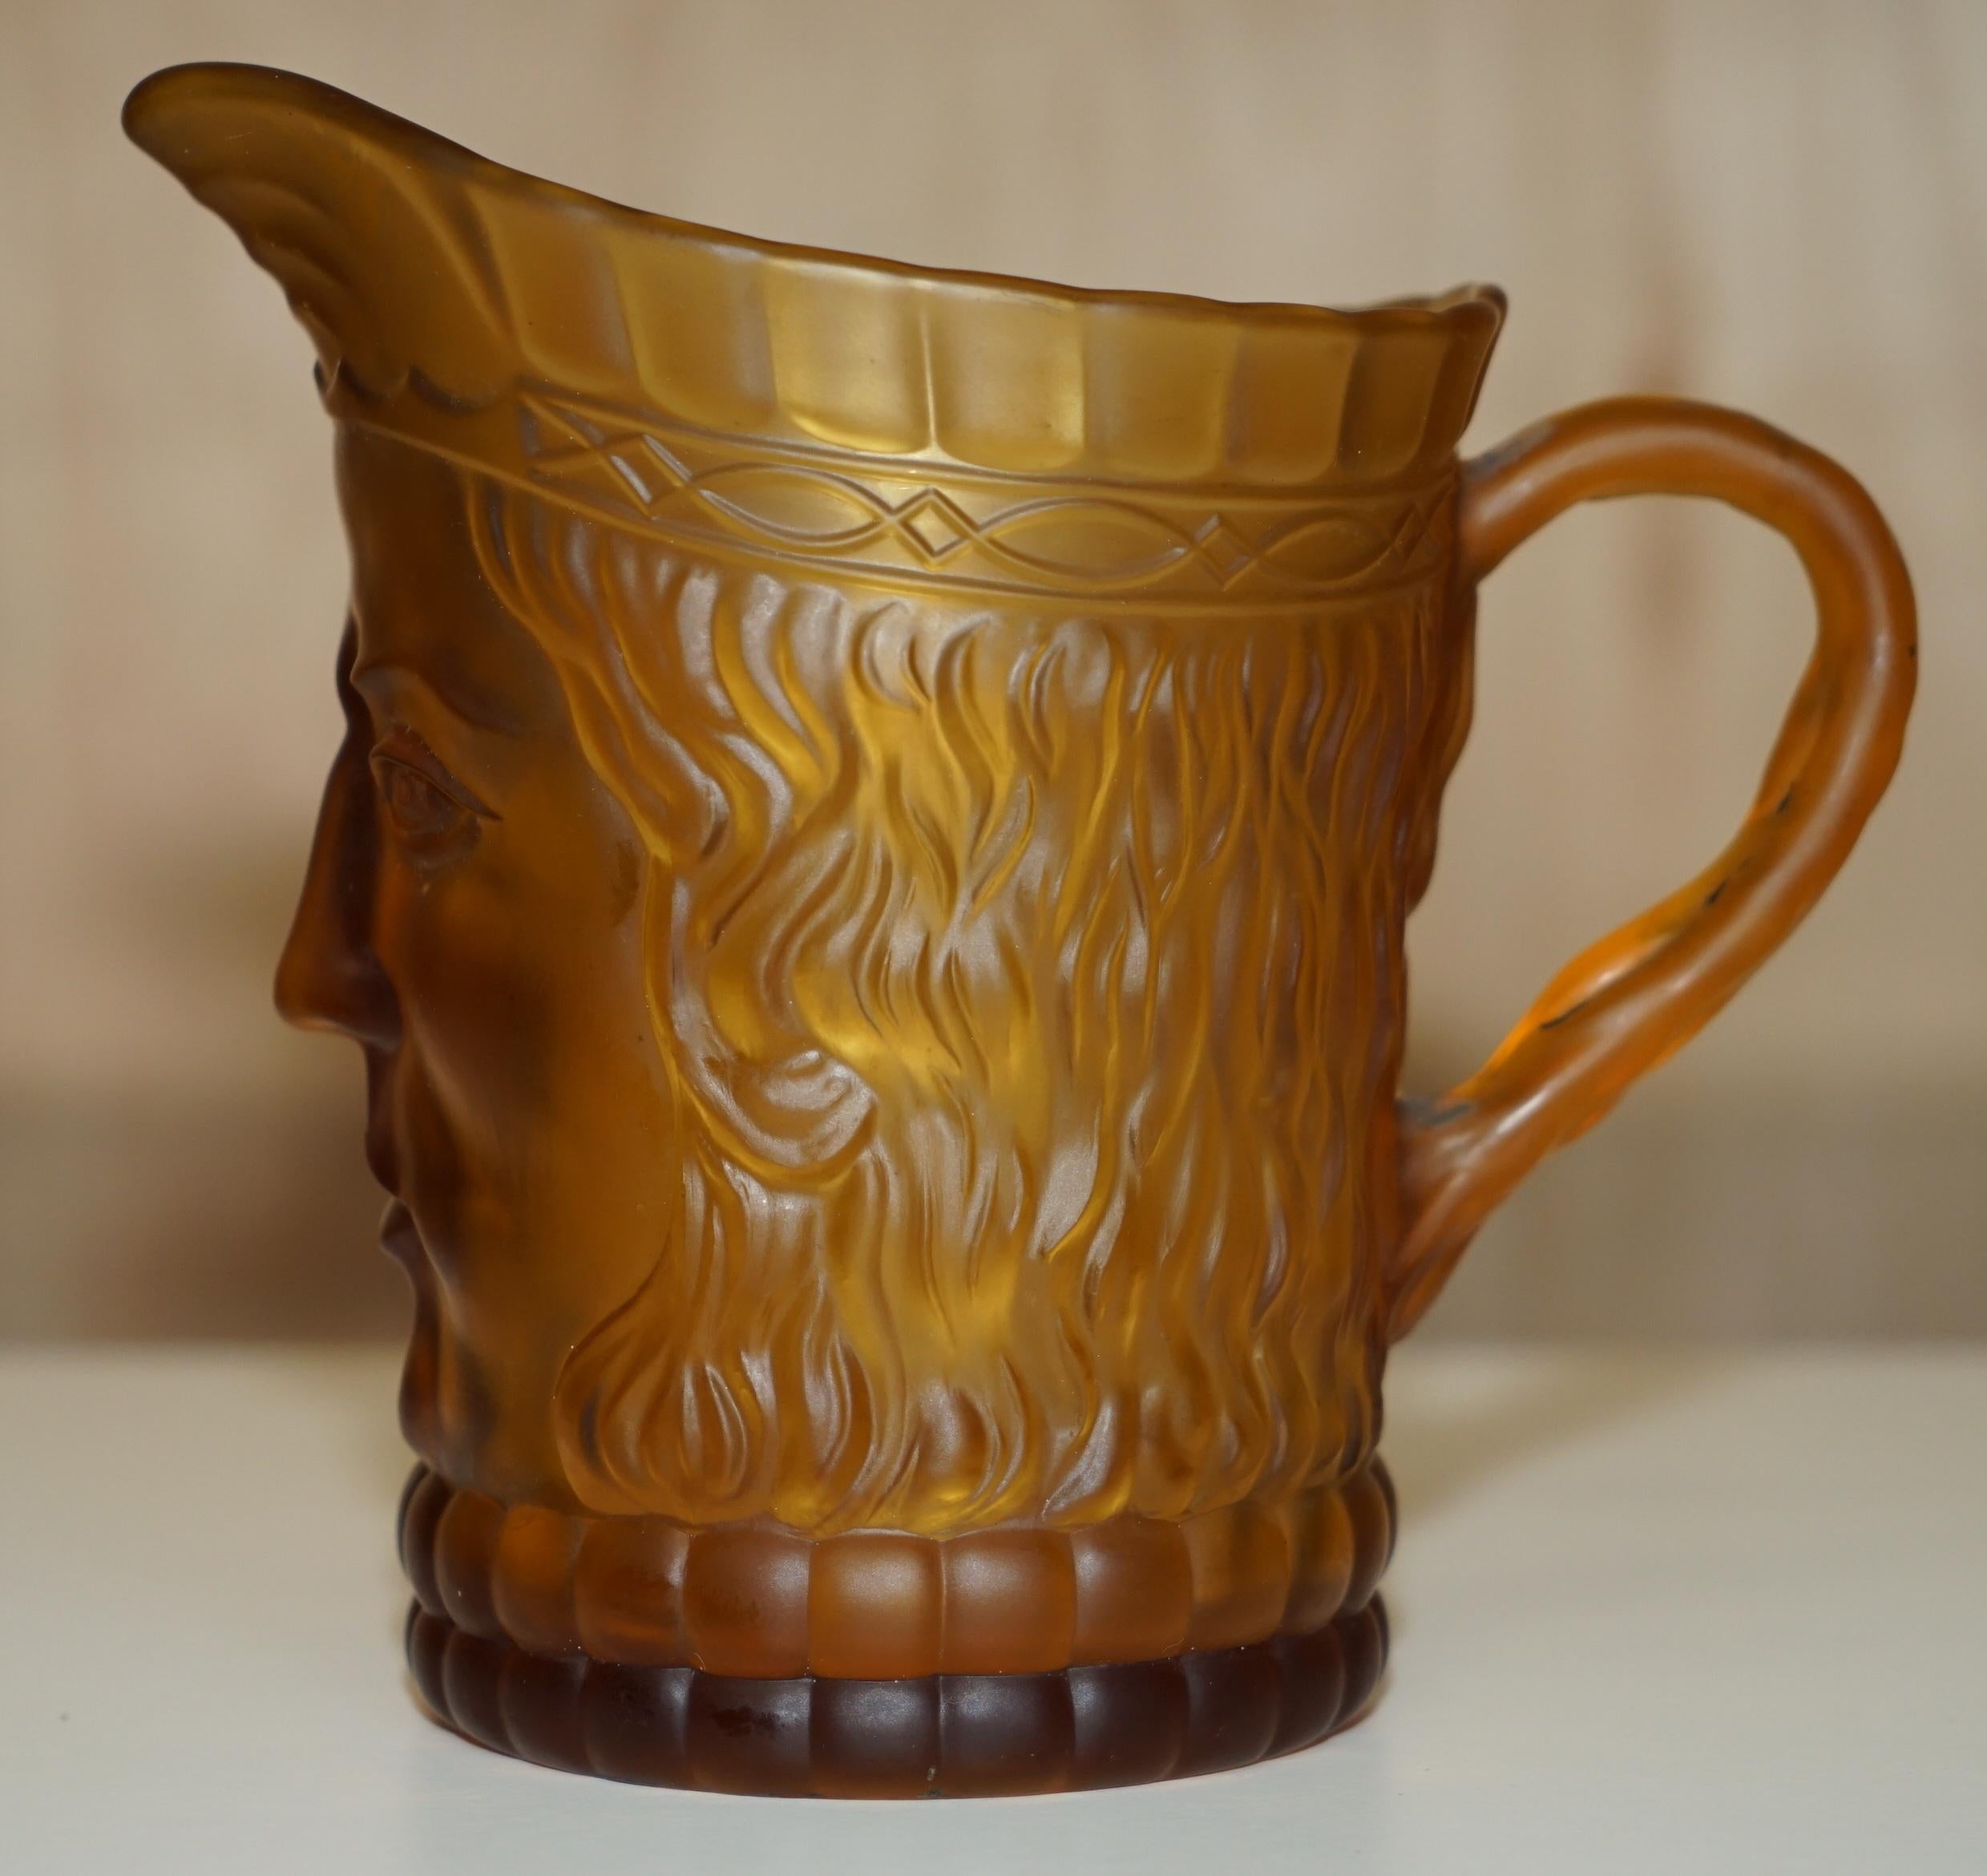 VINTAGE ART DECO CIRCA 1920's AMBER FACE GLASS CUP SUITE WITH LARGE PITCHER JUG For Sale 6